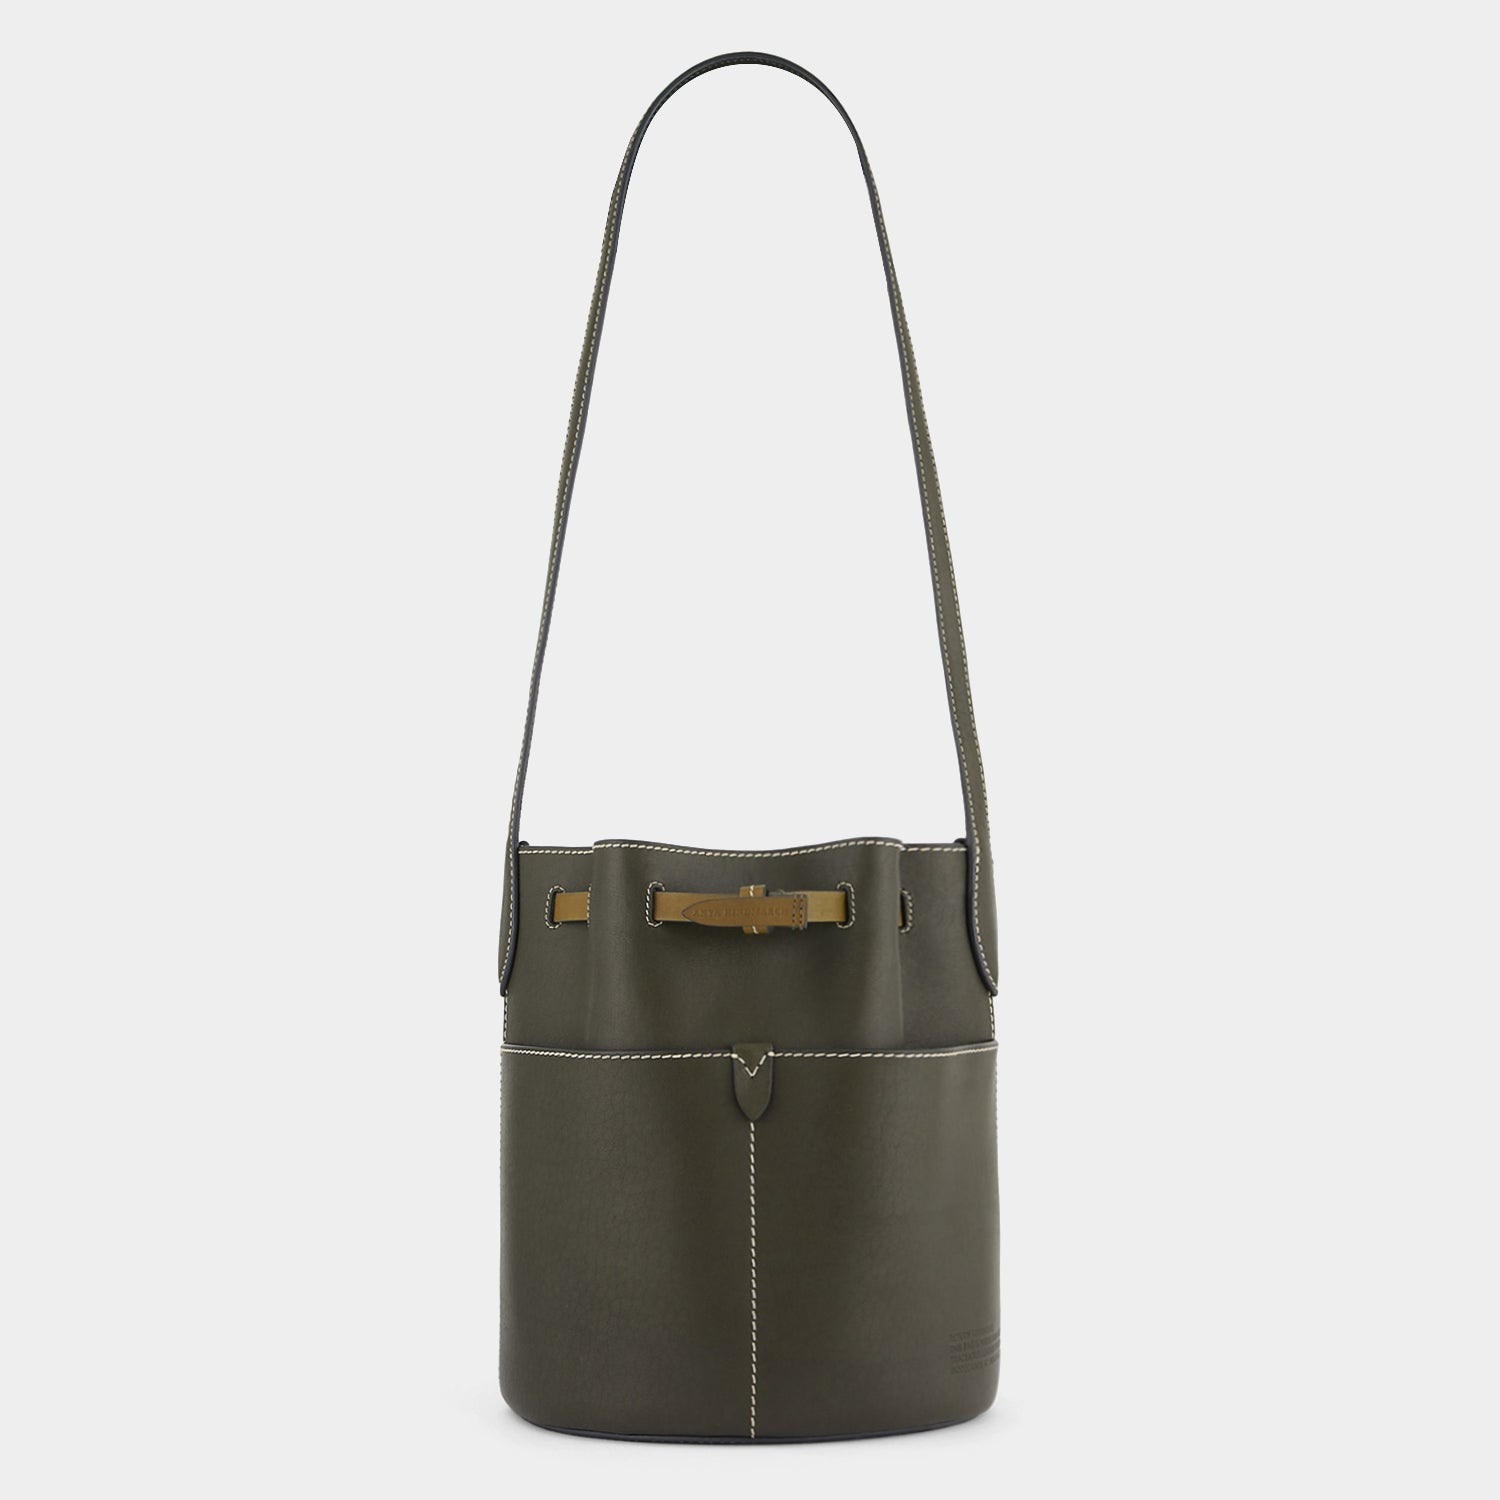 Return to Nature Small Bucket Bag -

                  
                    Compostable Leather in Dark Olive -
                  

                  Anya Hindmarch US
